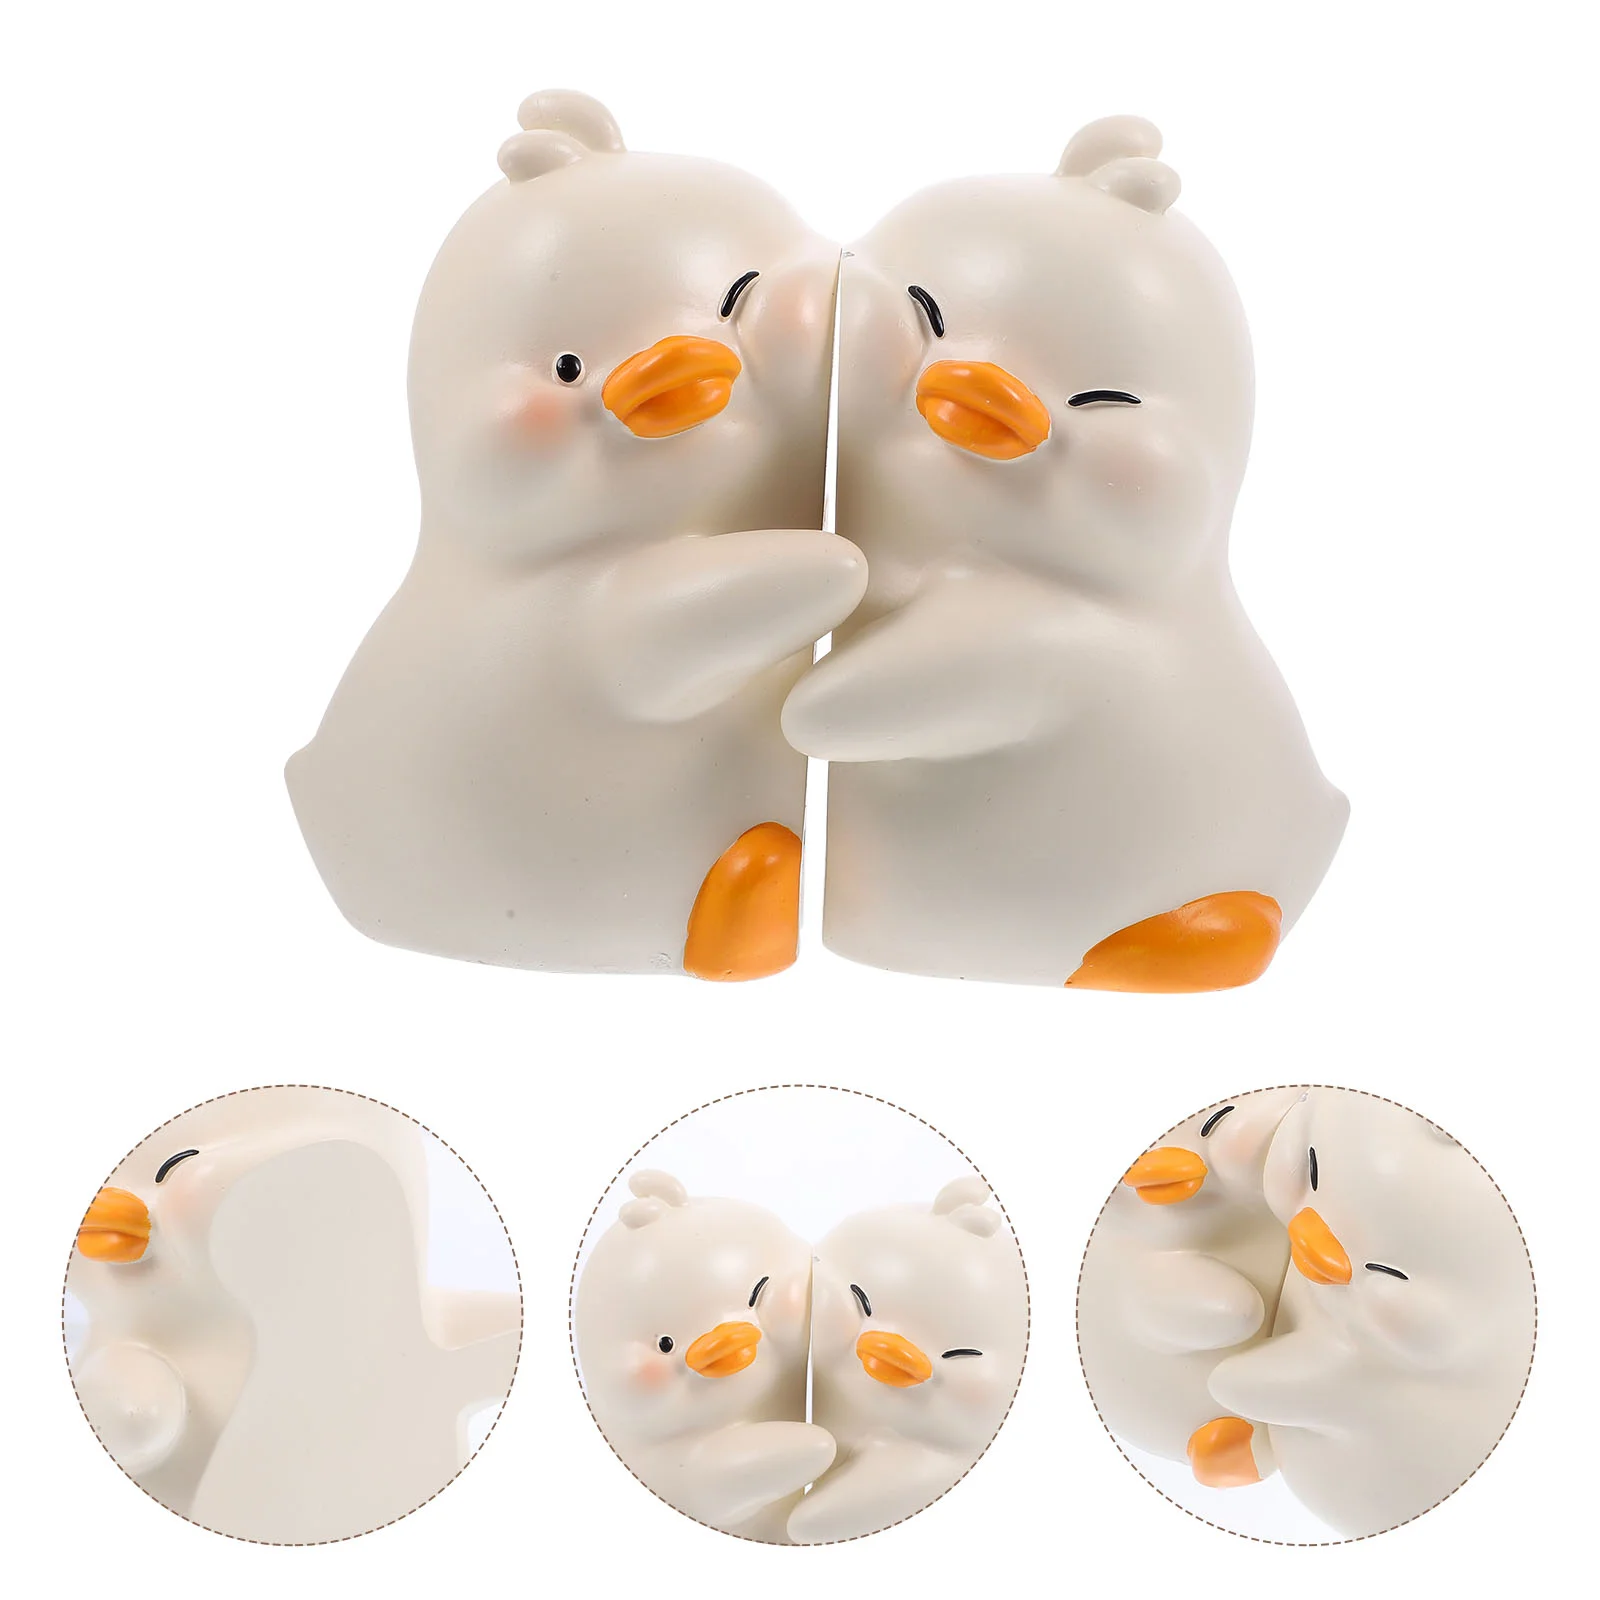 1 Pair Cute Hug Ducks Decorative Bookend Resin Book Holder Stopper for Home Office Desk 3set book ends metal bookends for shelves decorative tree book shelf non slip book stopper holder for school office home library